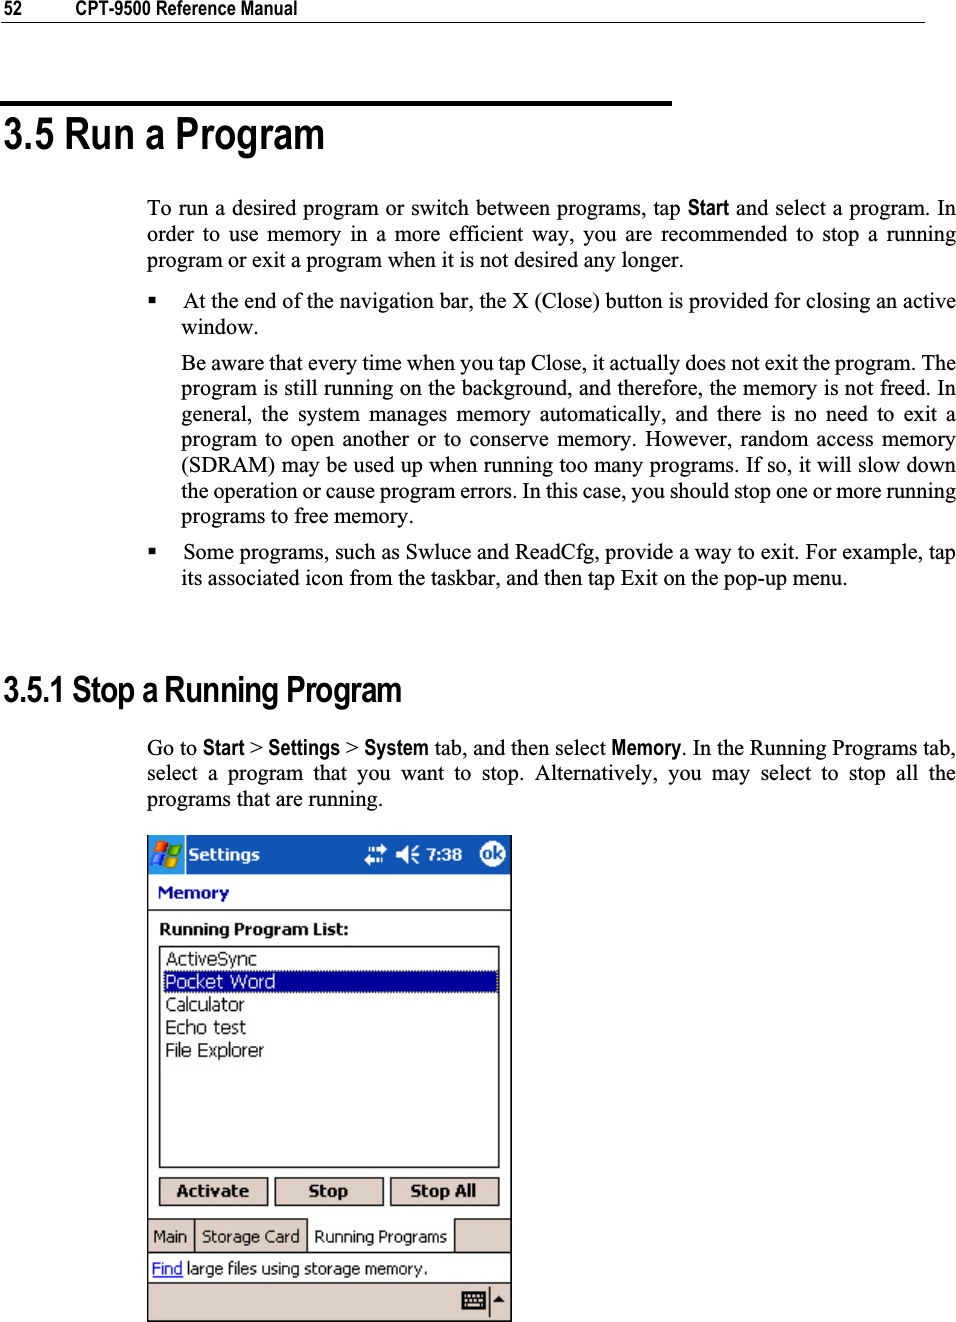 52  CPT-9500 Reference Manual 3.5 Run a Program To run a desired program or switch between programs, tap Start and select a program. In order to use memory in a more efficient way, you are recommended to stop a running program or exit a program when it is not desired any longer. At the end of the navigation bar, the X (Close) button is provided for closing an active window.  Be aware that every time when you tap Close, it actually does not exit the program. The program is still running on the background, and therefore, the memory is not freed. In general, the system manages memory automatically, and there is no need to exit a program to open another or to conserve memory. However, random access memory (SDRAM) may be used up when running too many programs. If so, it will slow down the operation or cause program errors. In this case, you should stop one or more running programs to free memory. Some programs, such as Swluce and ReadCfg, provide a way to exit. For example, tap its associated icon from the taskbar, and then tap Exit on the pop-up menu. 3.5.1 Stop a Running Program Go to Start &gt; Settings &gt; System tab, and then select Memory. In the Running Programs tab, select a program that you want to stop. Alternatively, you may select to stop all the programs that are running. 